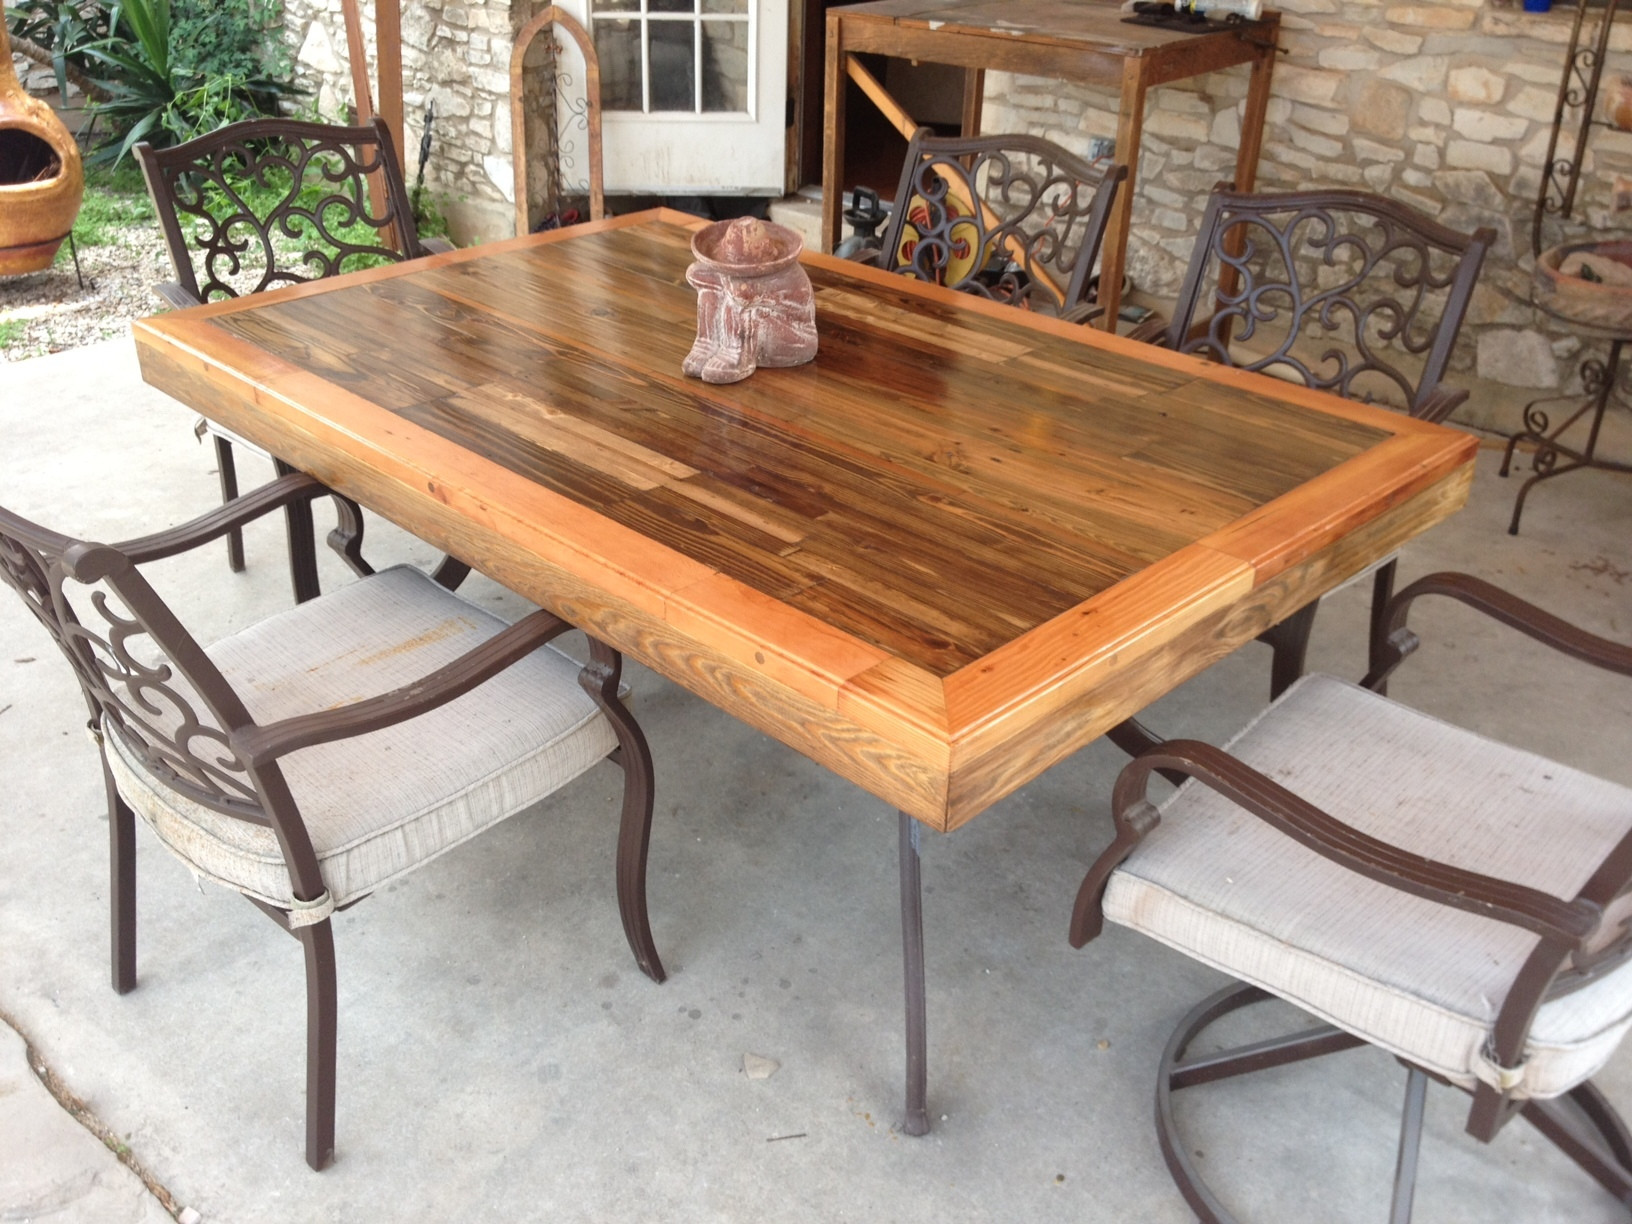 Wooden Dining Table Idea Patio Tabletop Made From Reclaimed Deck Wood